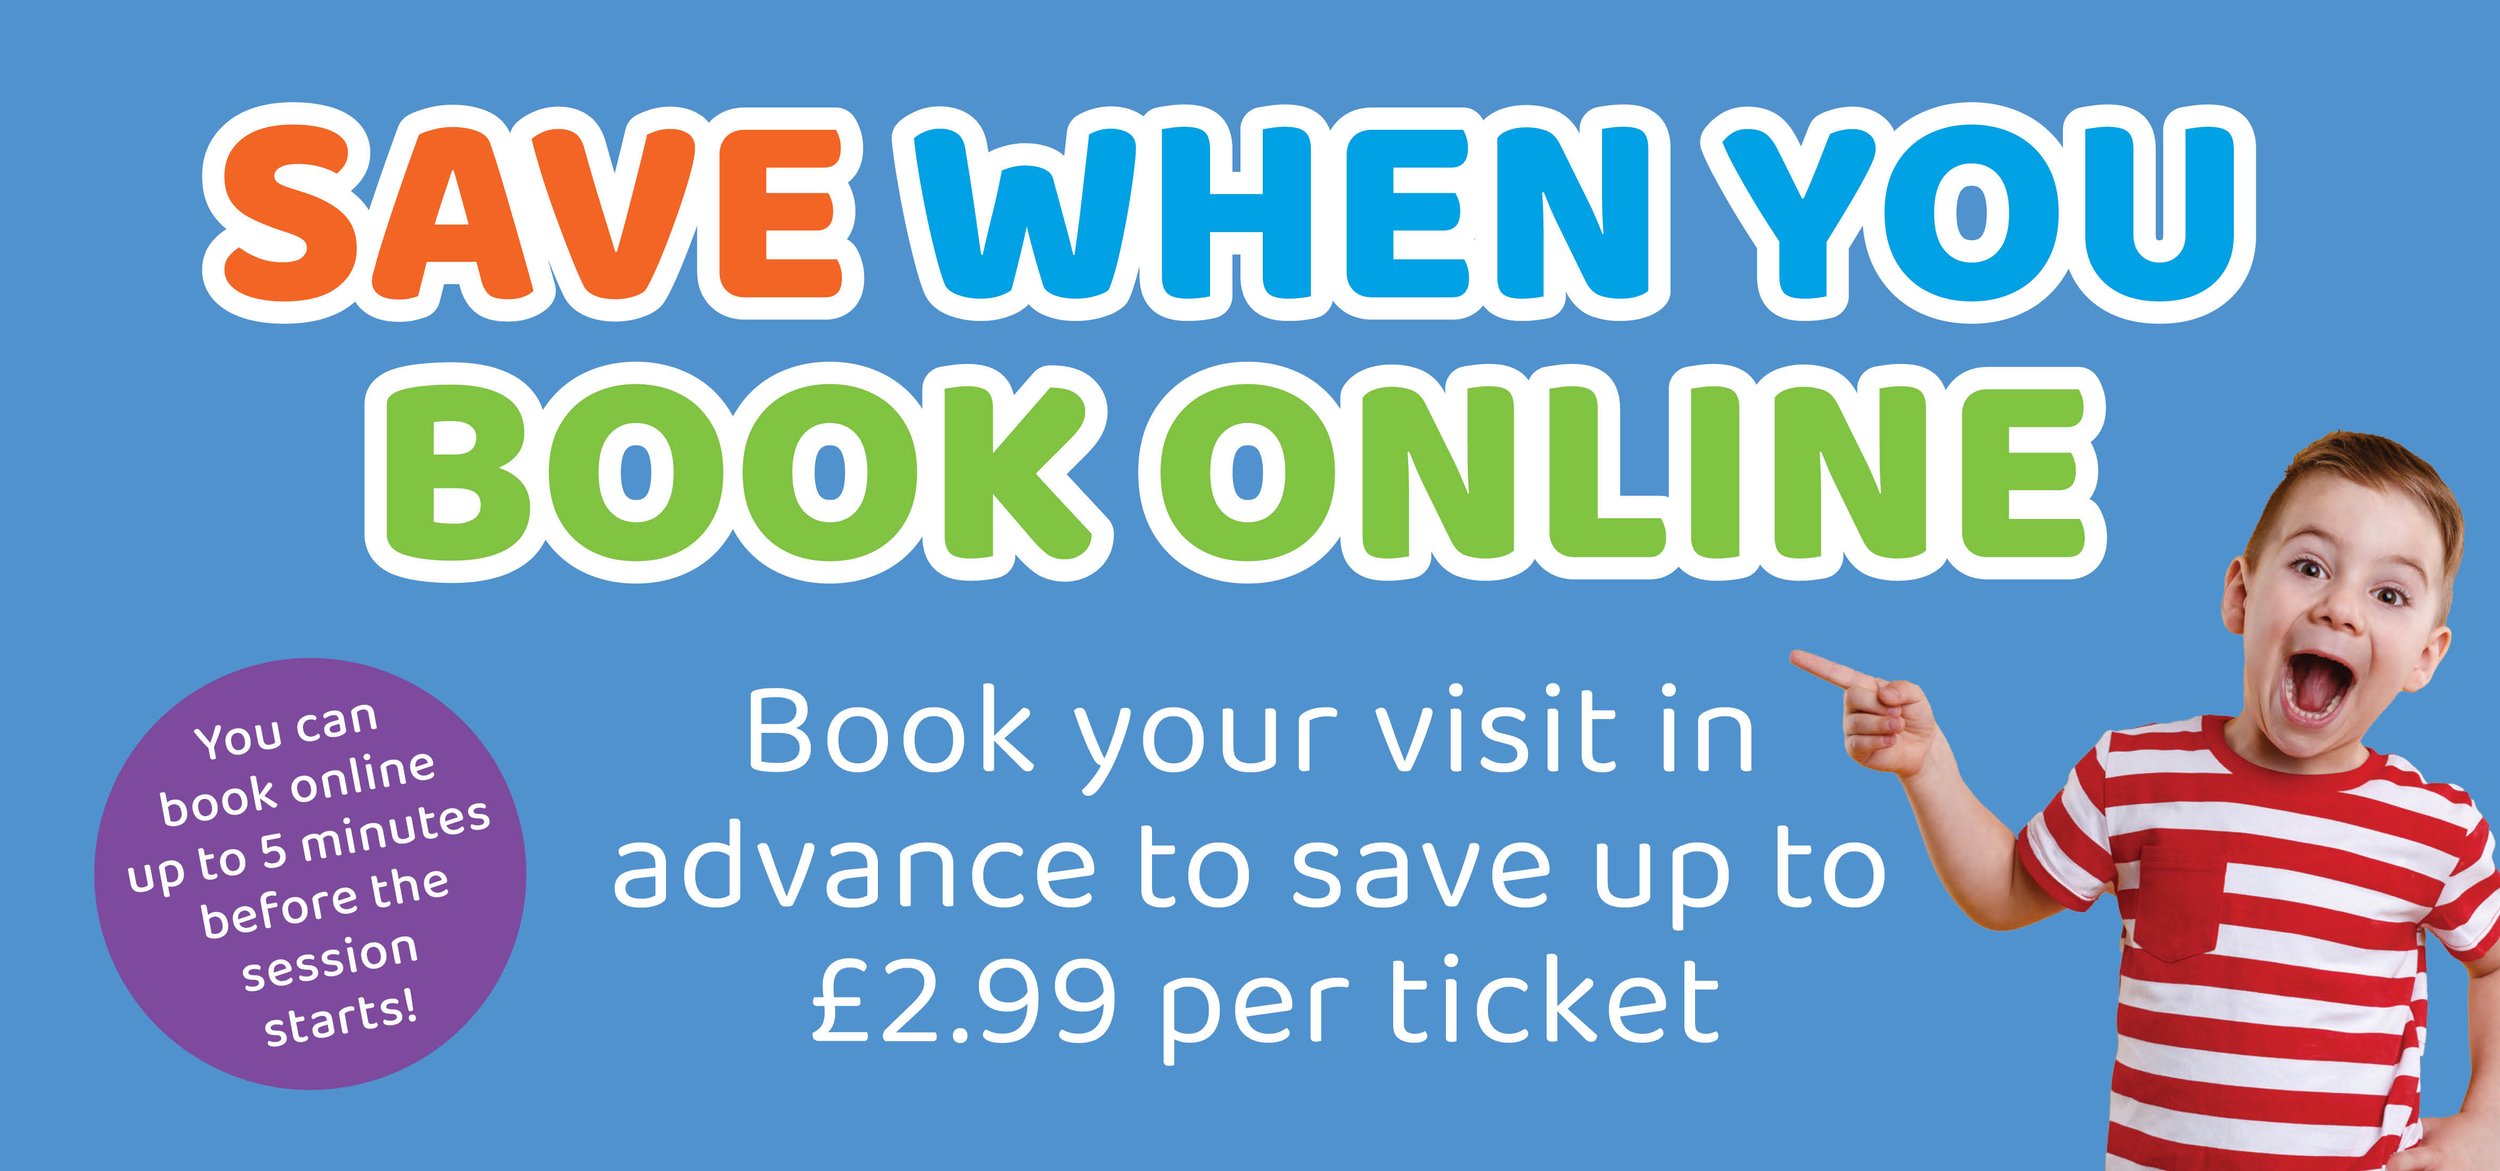 Save When You Book Online - Website Banners.jpg